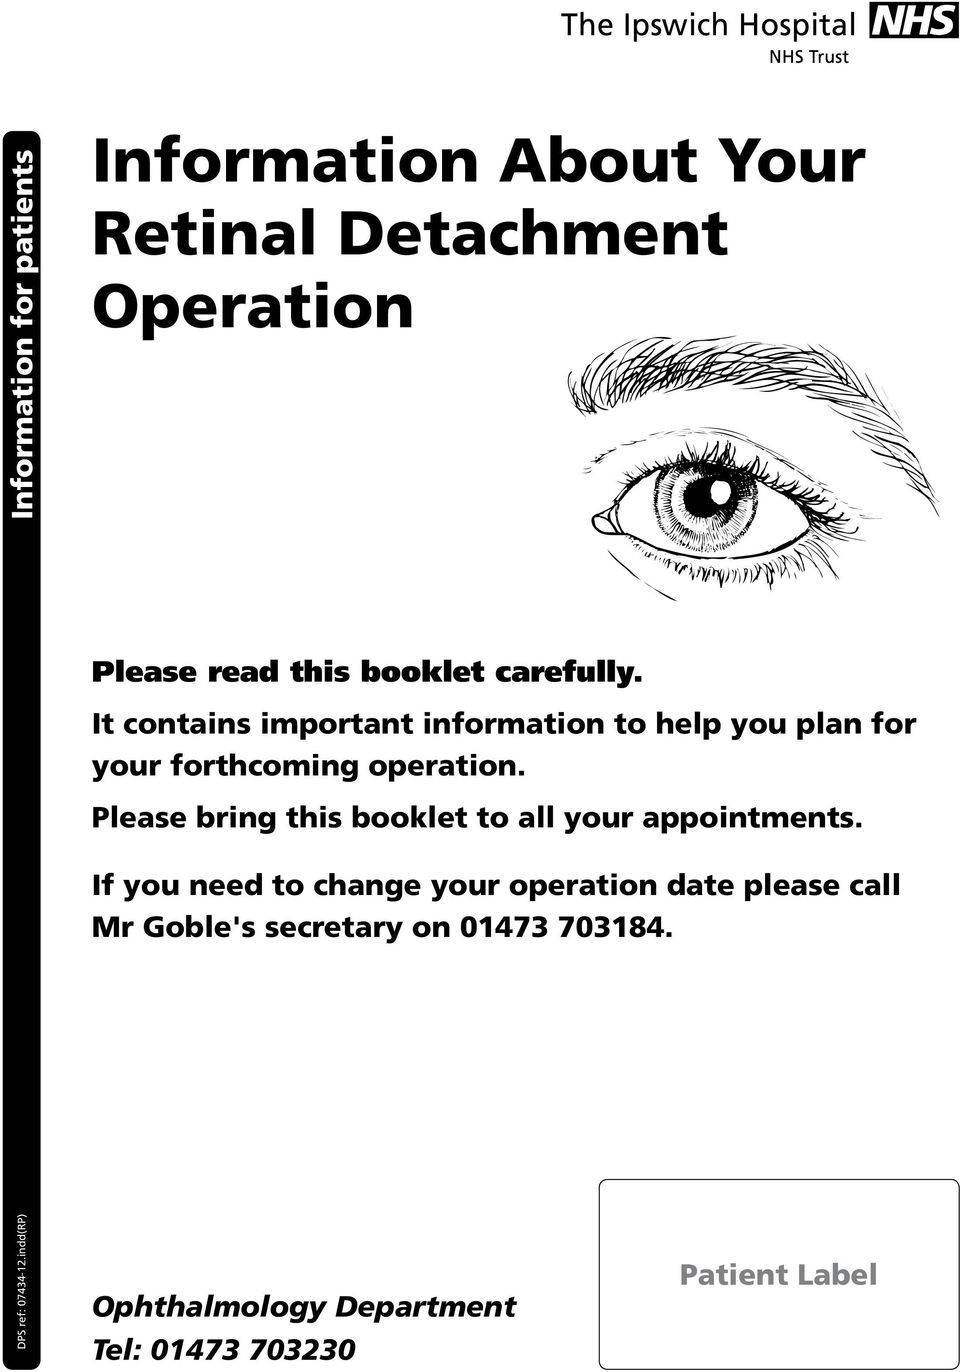 Please bring this booklet to all your appointments.